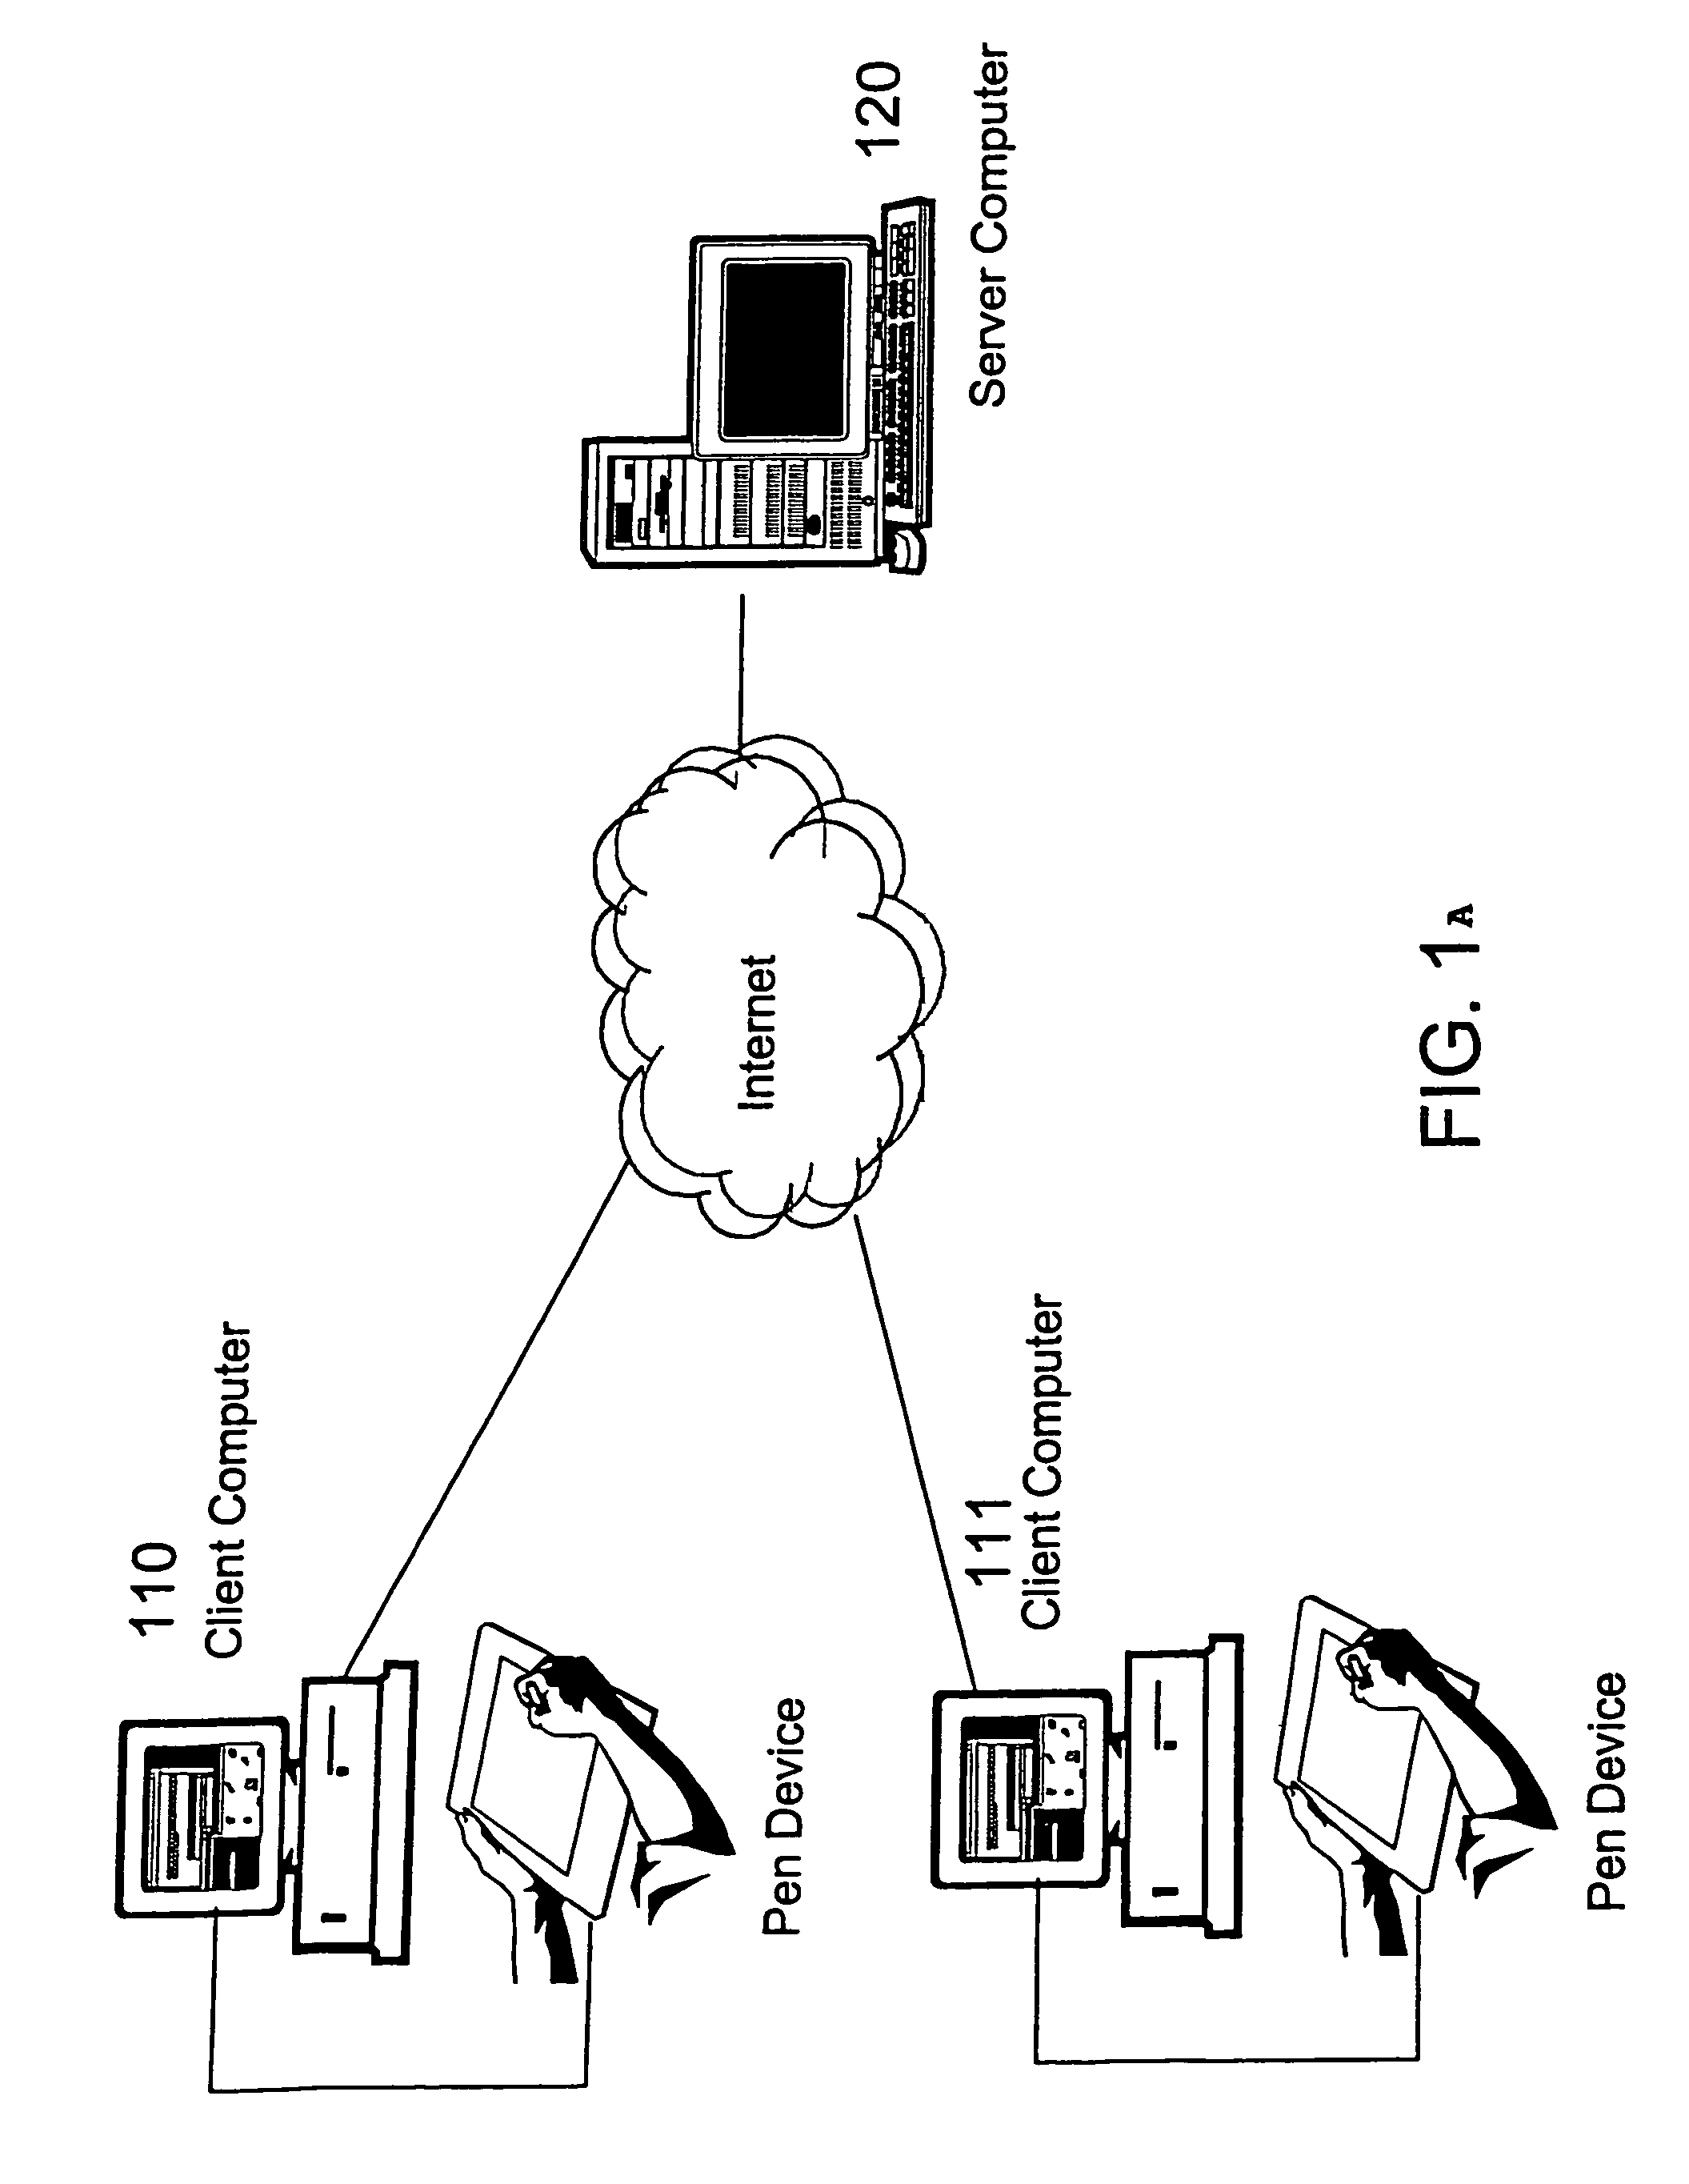 Method and system for creating and sending handwritten or handdrawn messages via mobile devices